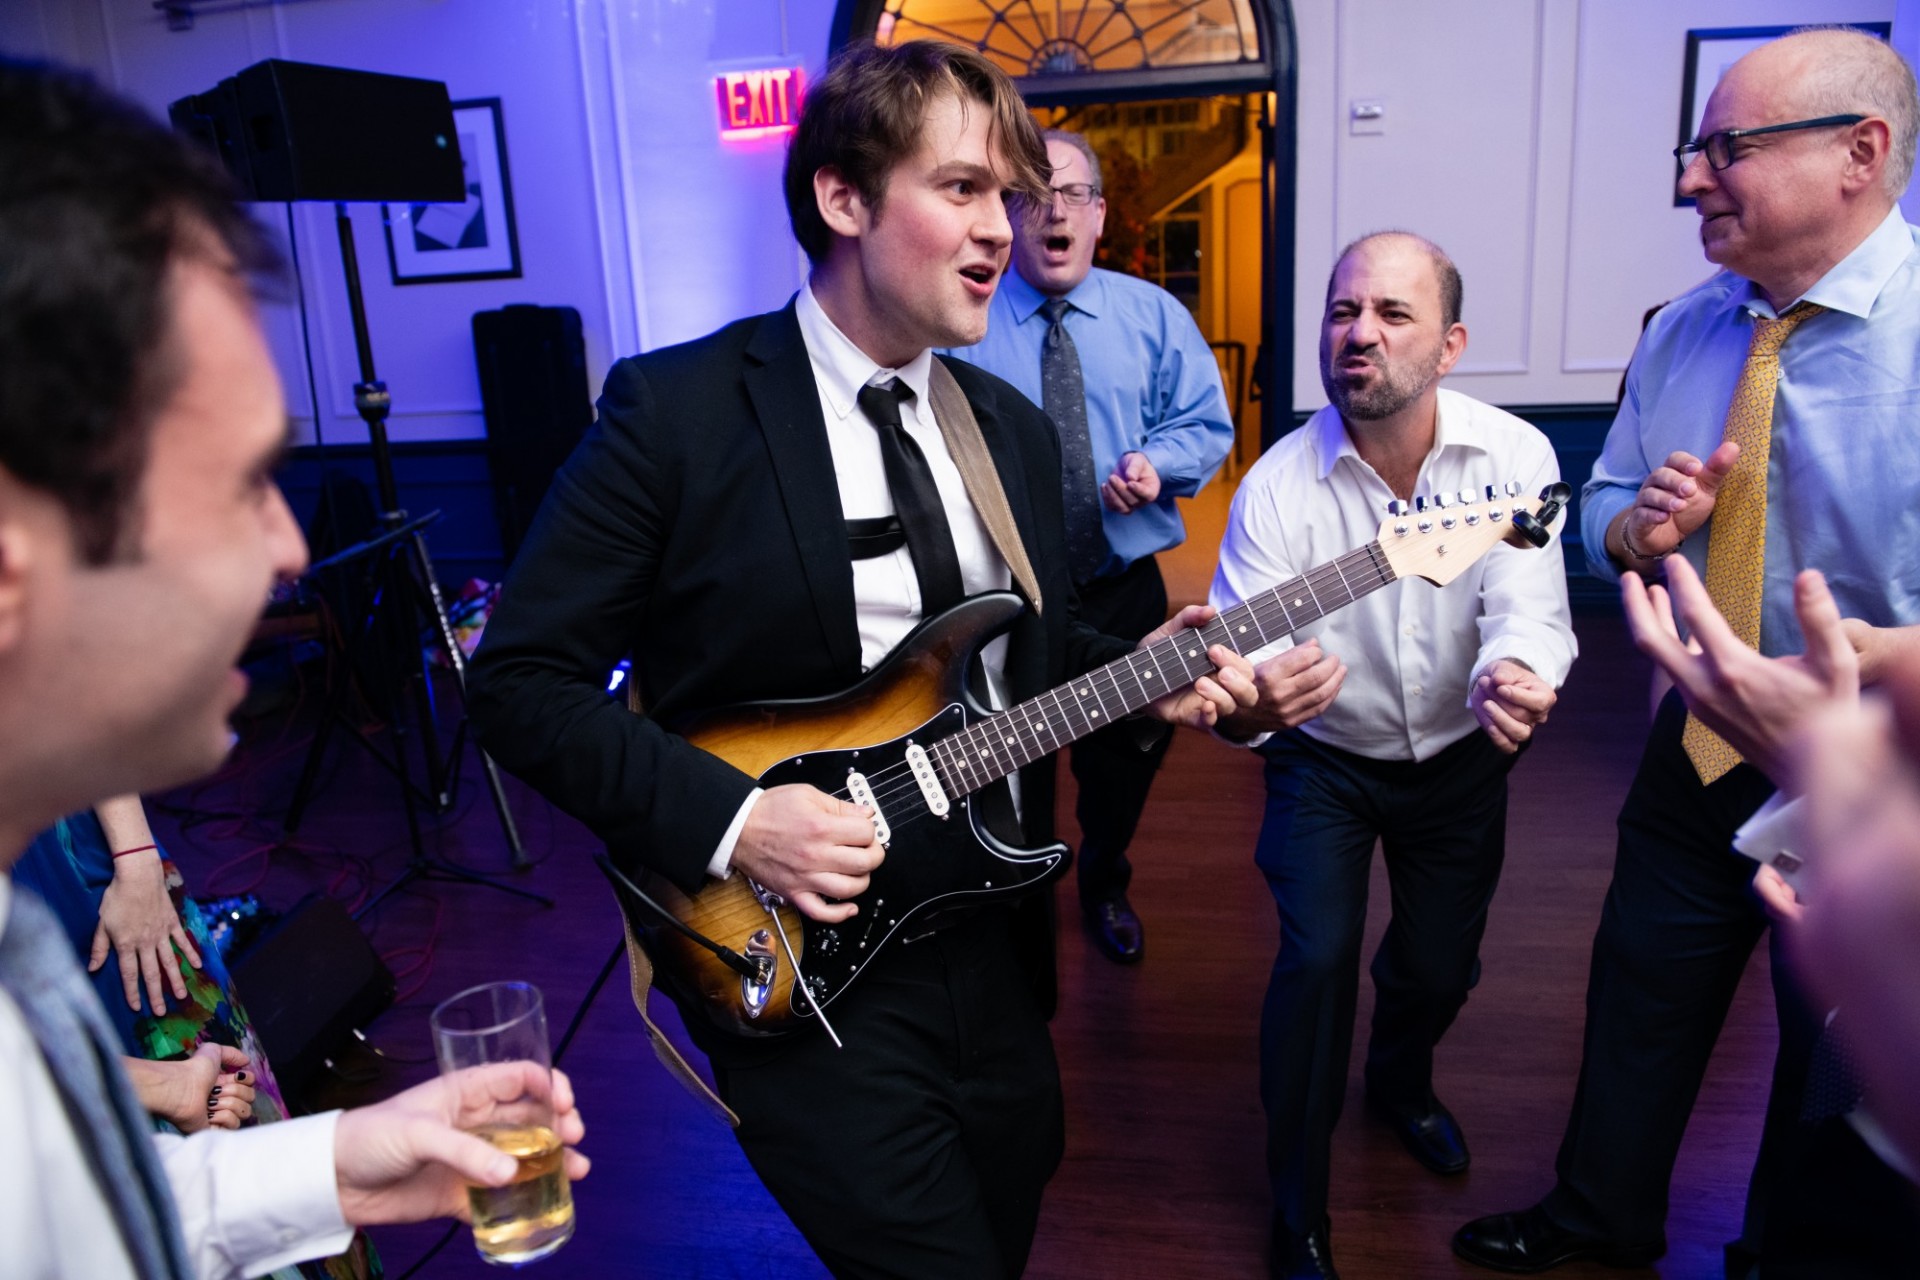 A guitarist stands on the Faculty House dance floor surrounded by party goers.